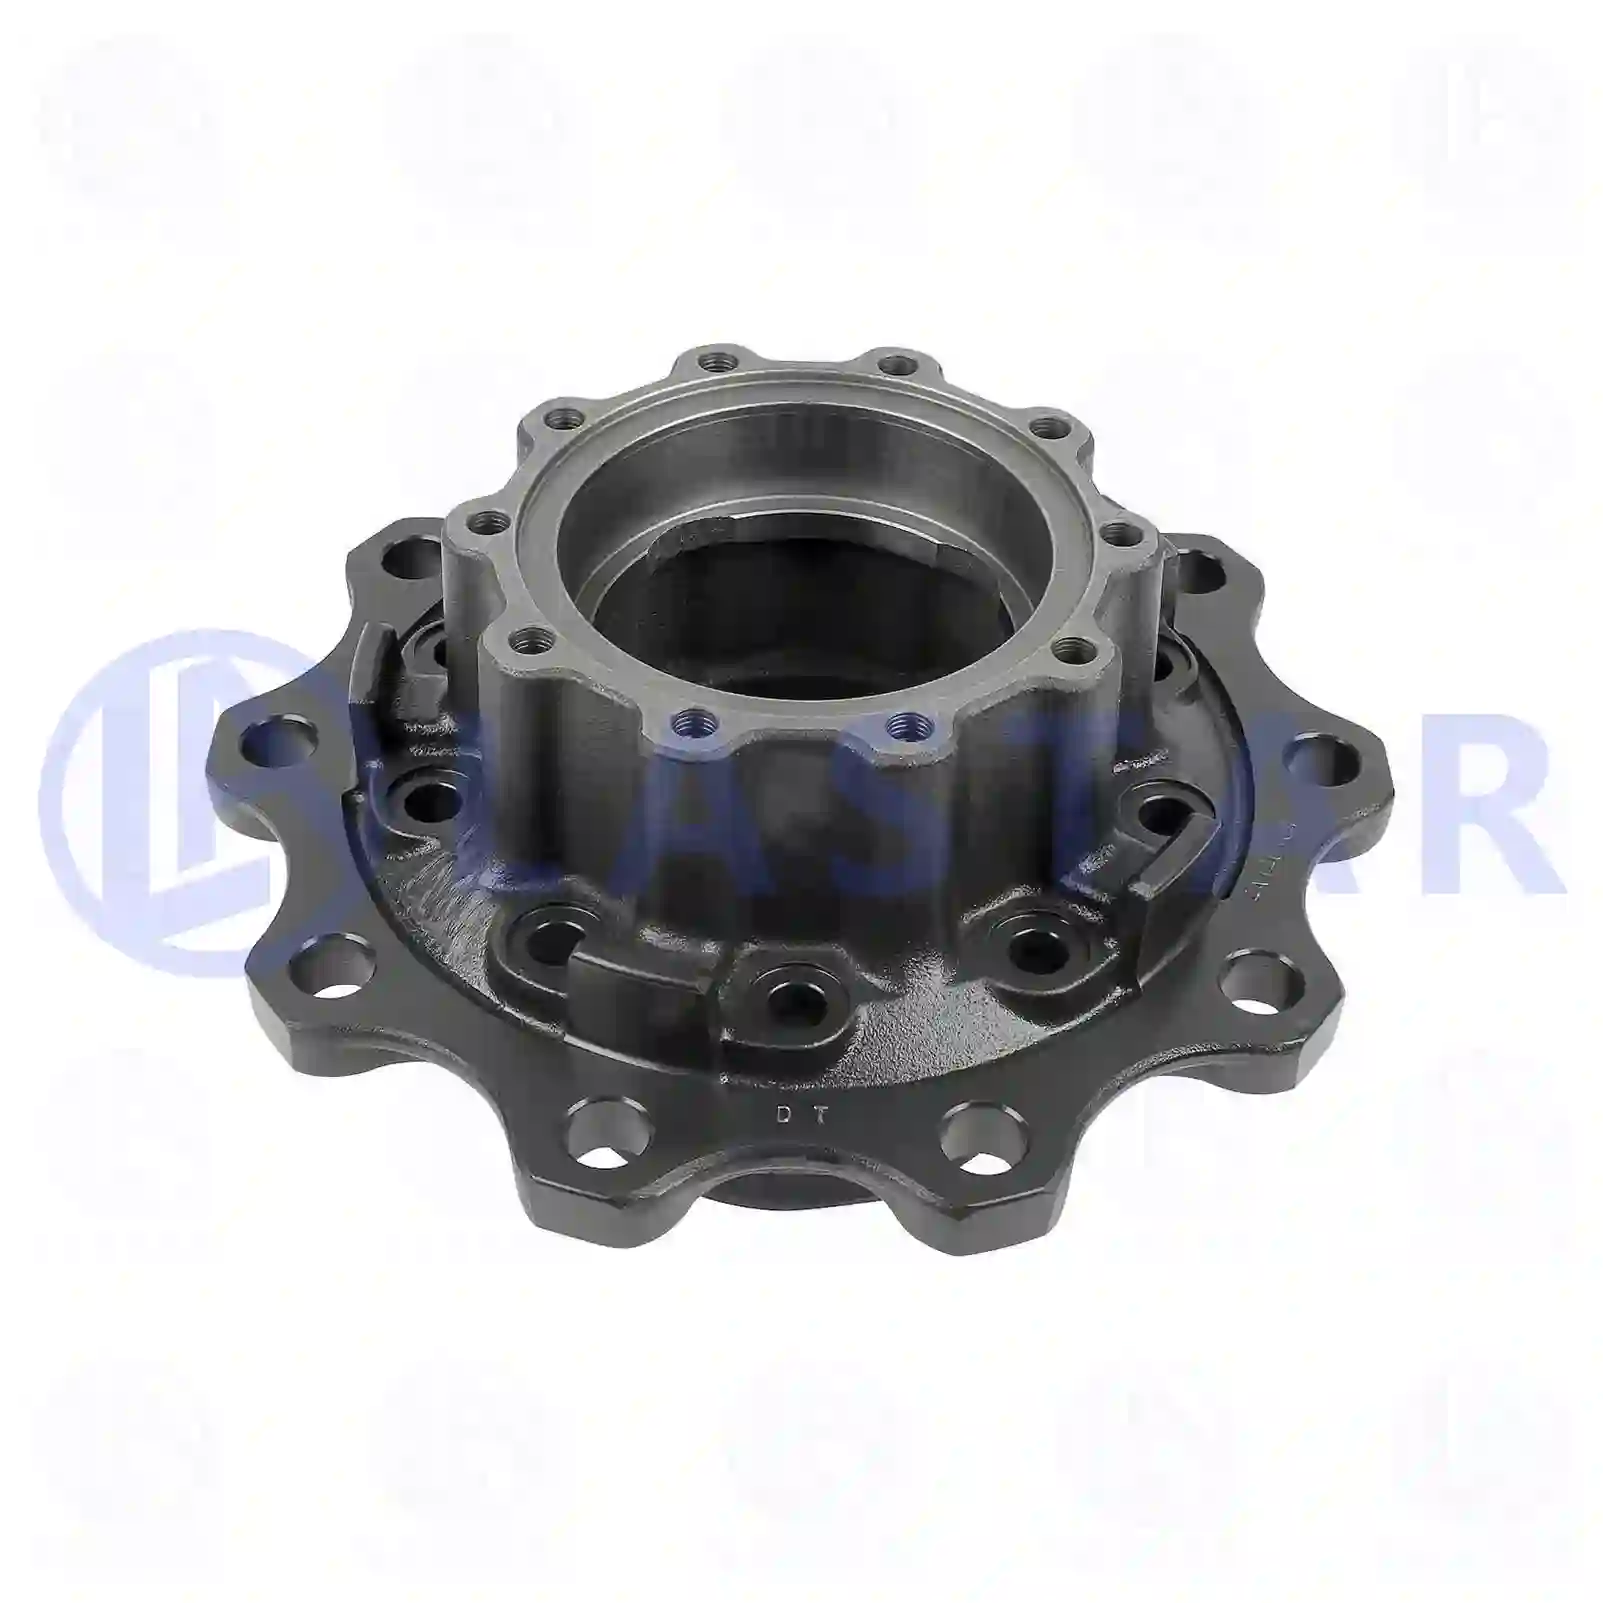 Wheel hub, without bearings, without ABS ring, 77726833, 1800283, 2290542, ZG30240-0008, , , ||  77726833 Lastar Spare Part | Truck Spare Parts, Auotomotive Spare Parts Wheel hub, without bearings, without ABS ring, 77726833, 1800283, 2290542, ZG30240-0008, , , ||  77726833 Lastar Spare Part | Truck Spare Parts, Auotomotive Spare Parts